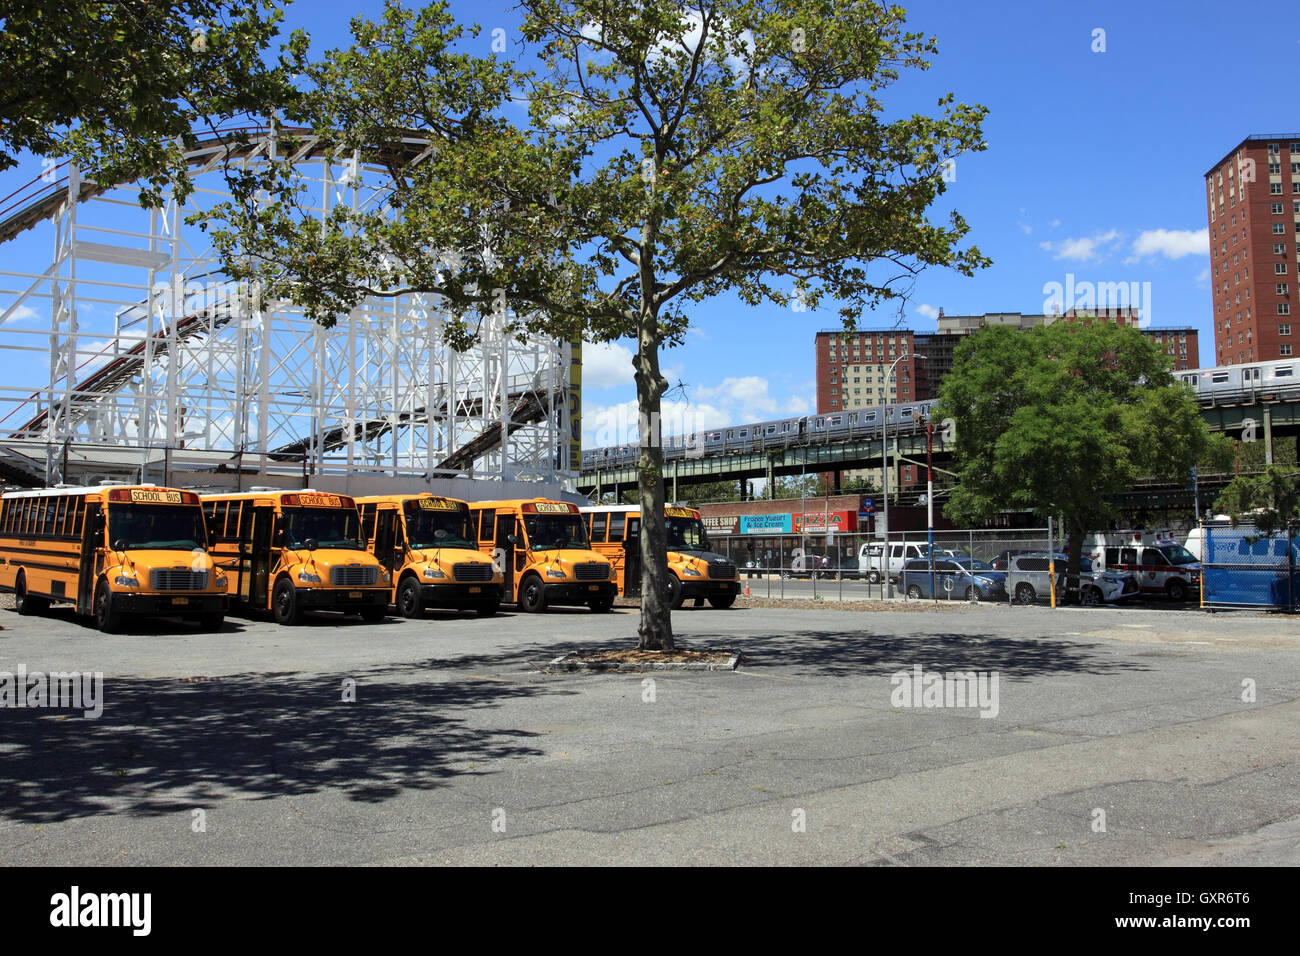 Le famose Montagne russe Ciclone Coney Island Brooklyn New York City Foto Stock